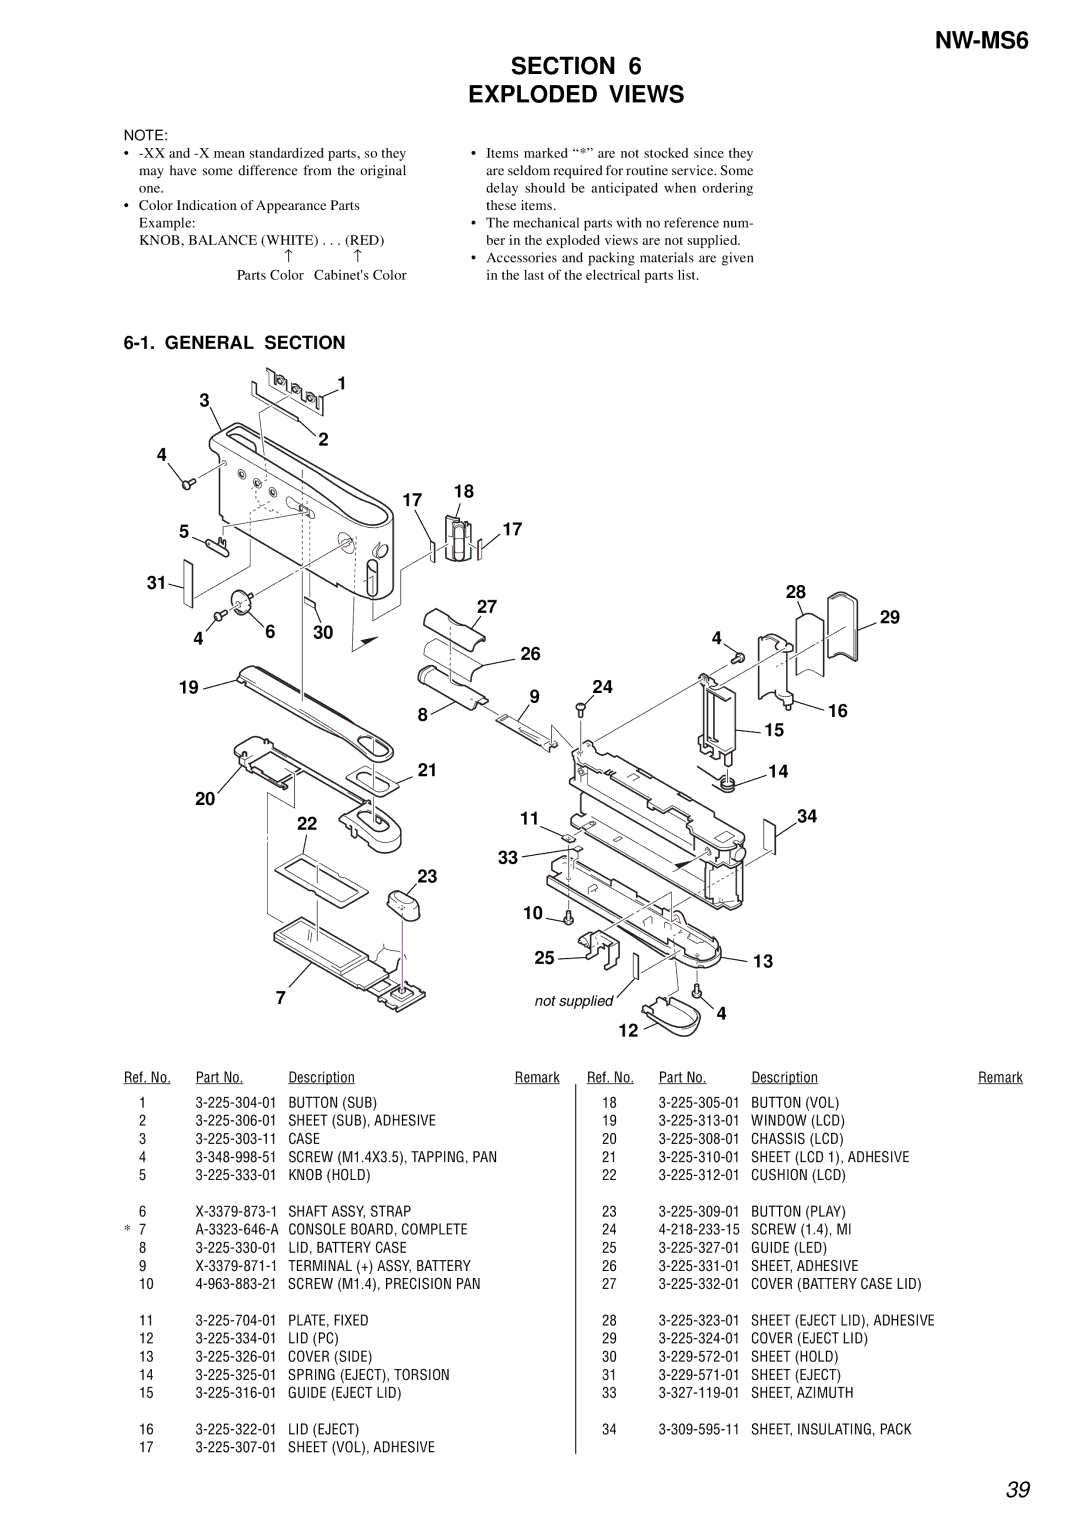 Sony NW-MS6 service manual Section Exploded Views, General Section, 17 18 